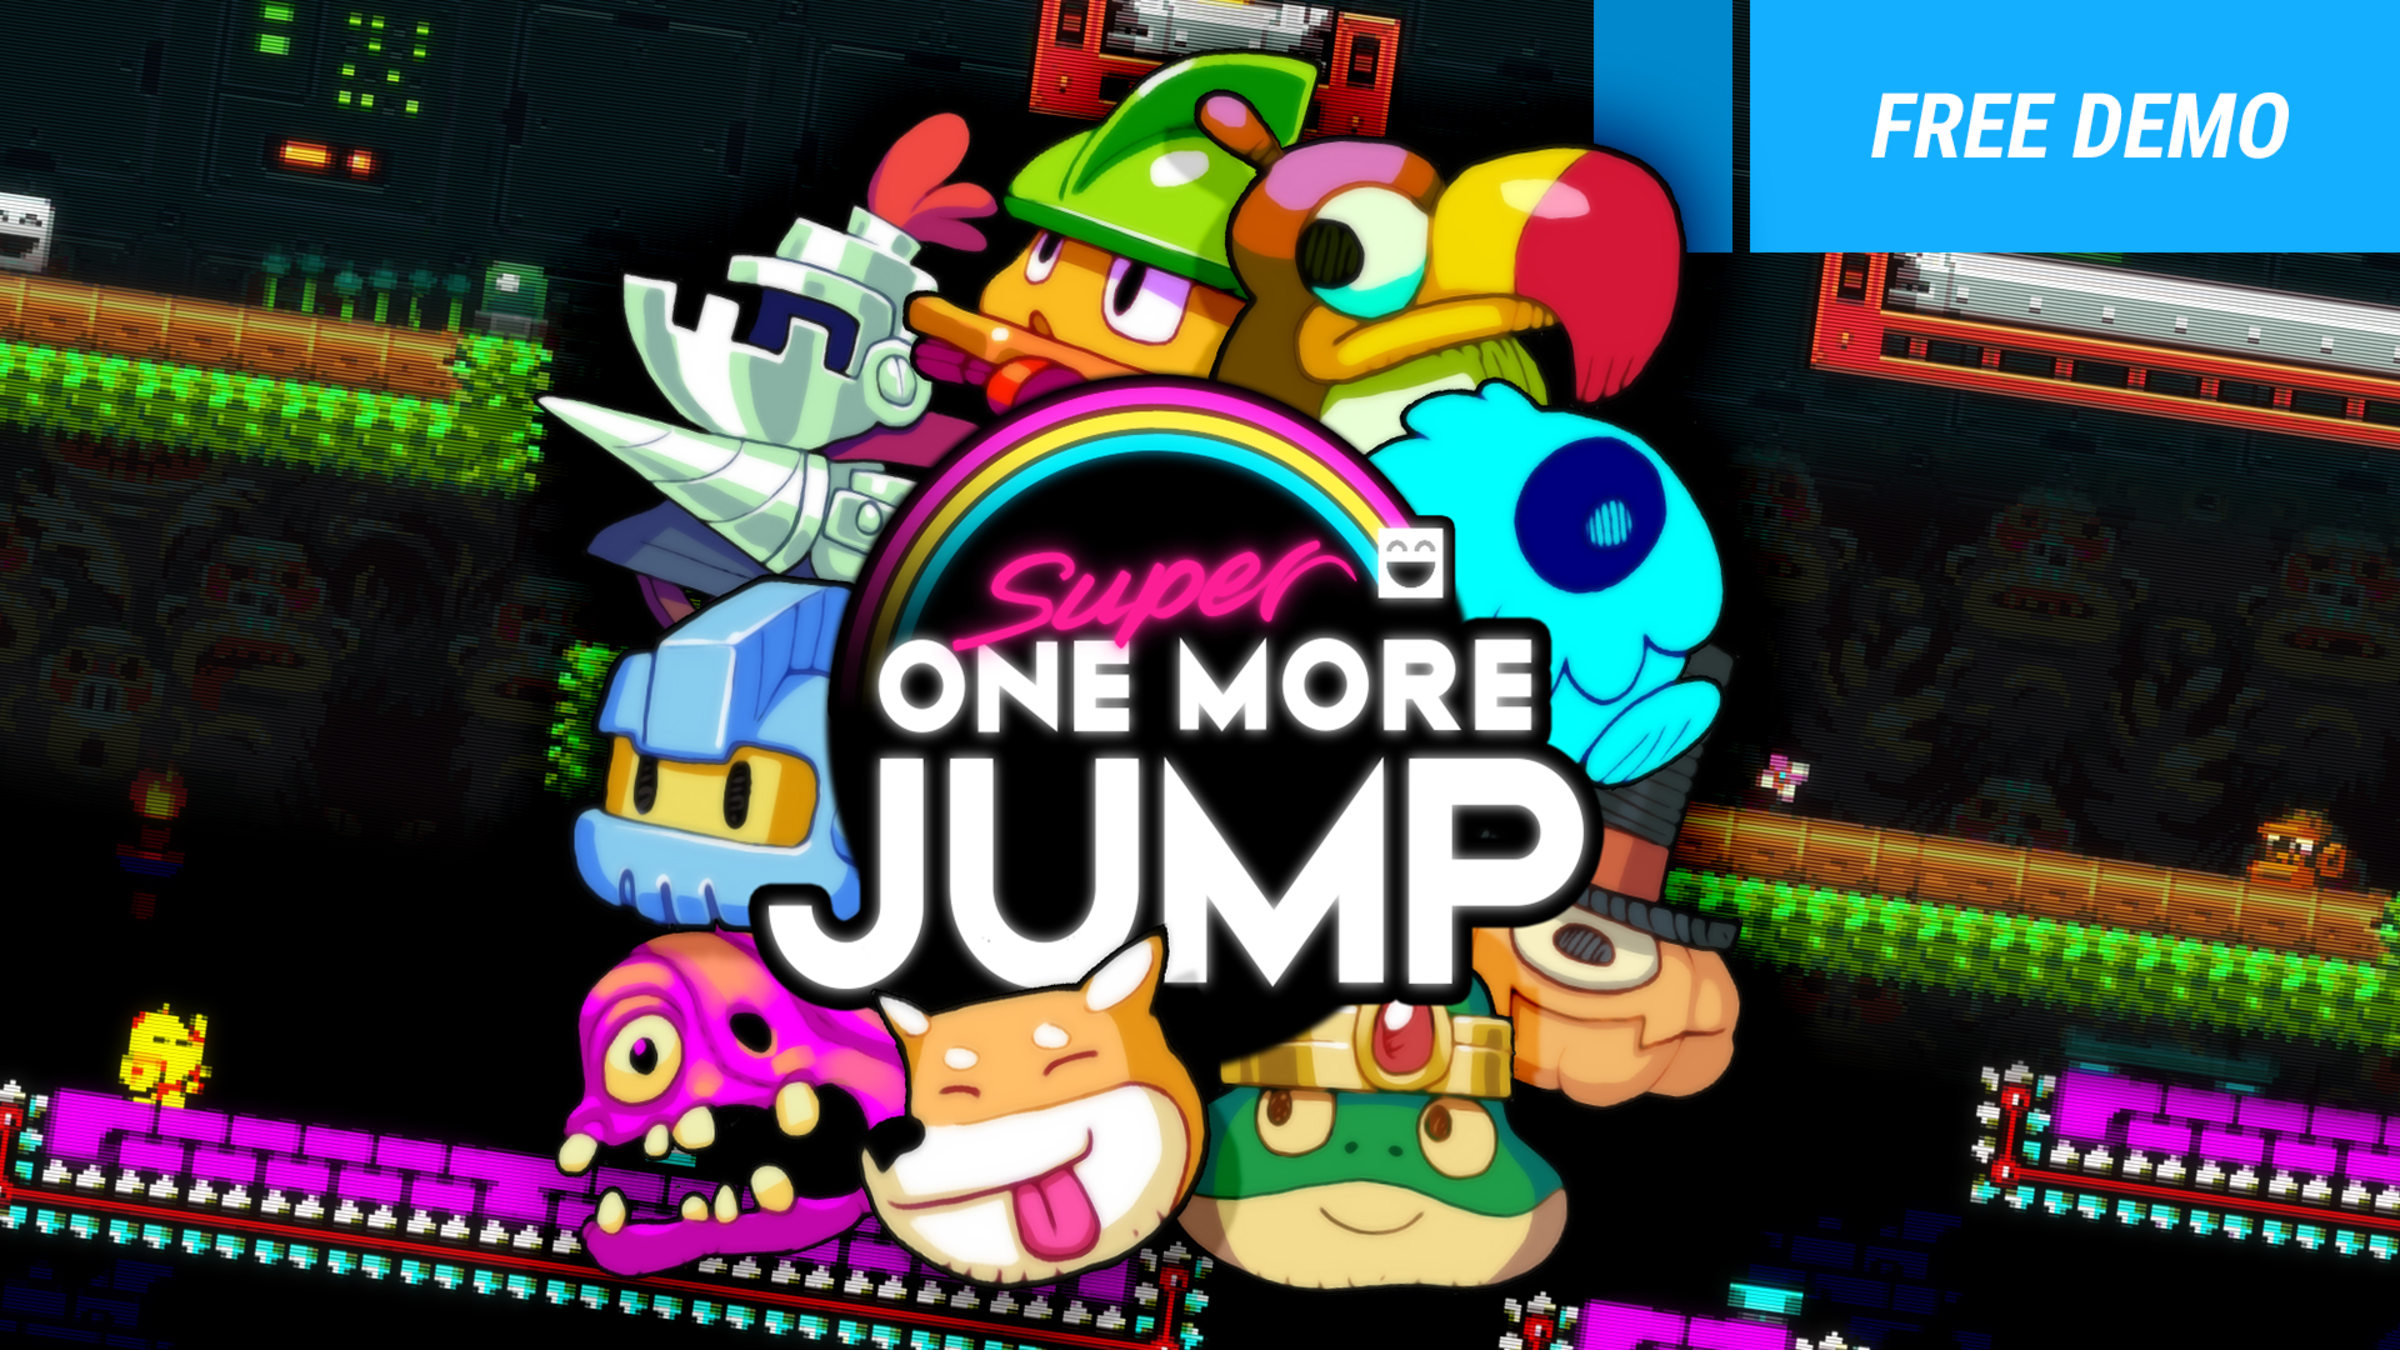 Super One More Jump For Nintendo Switch - Nintendo Official Site